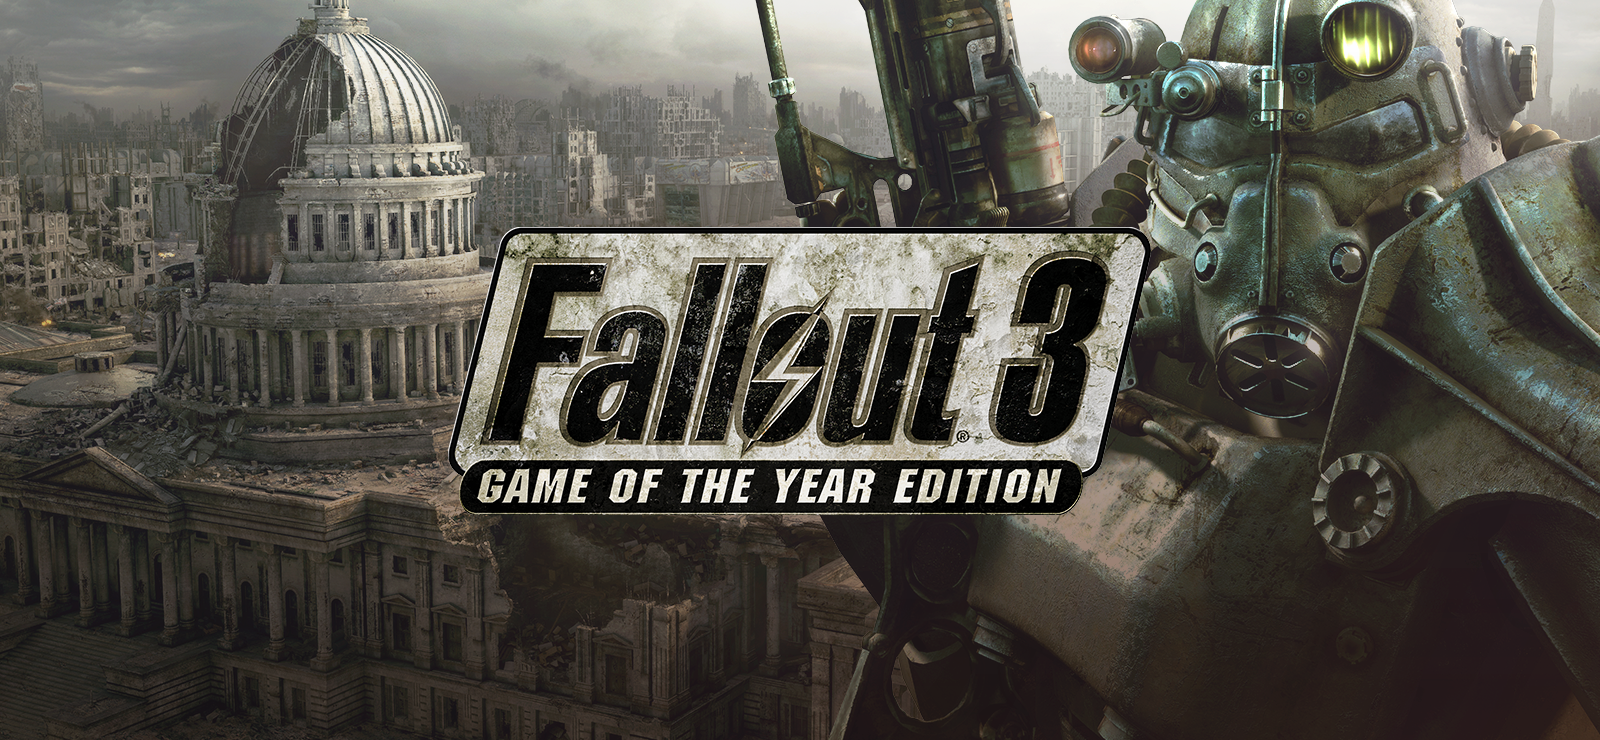 BESTSELLER - Fallout 3: Game Of The Year Edition